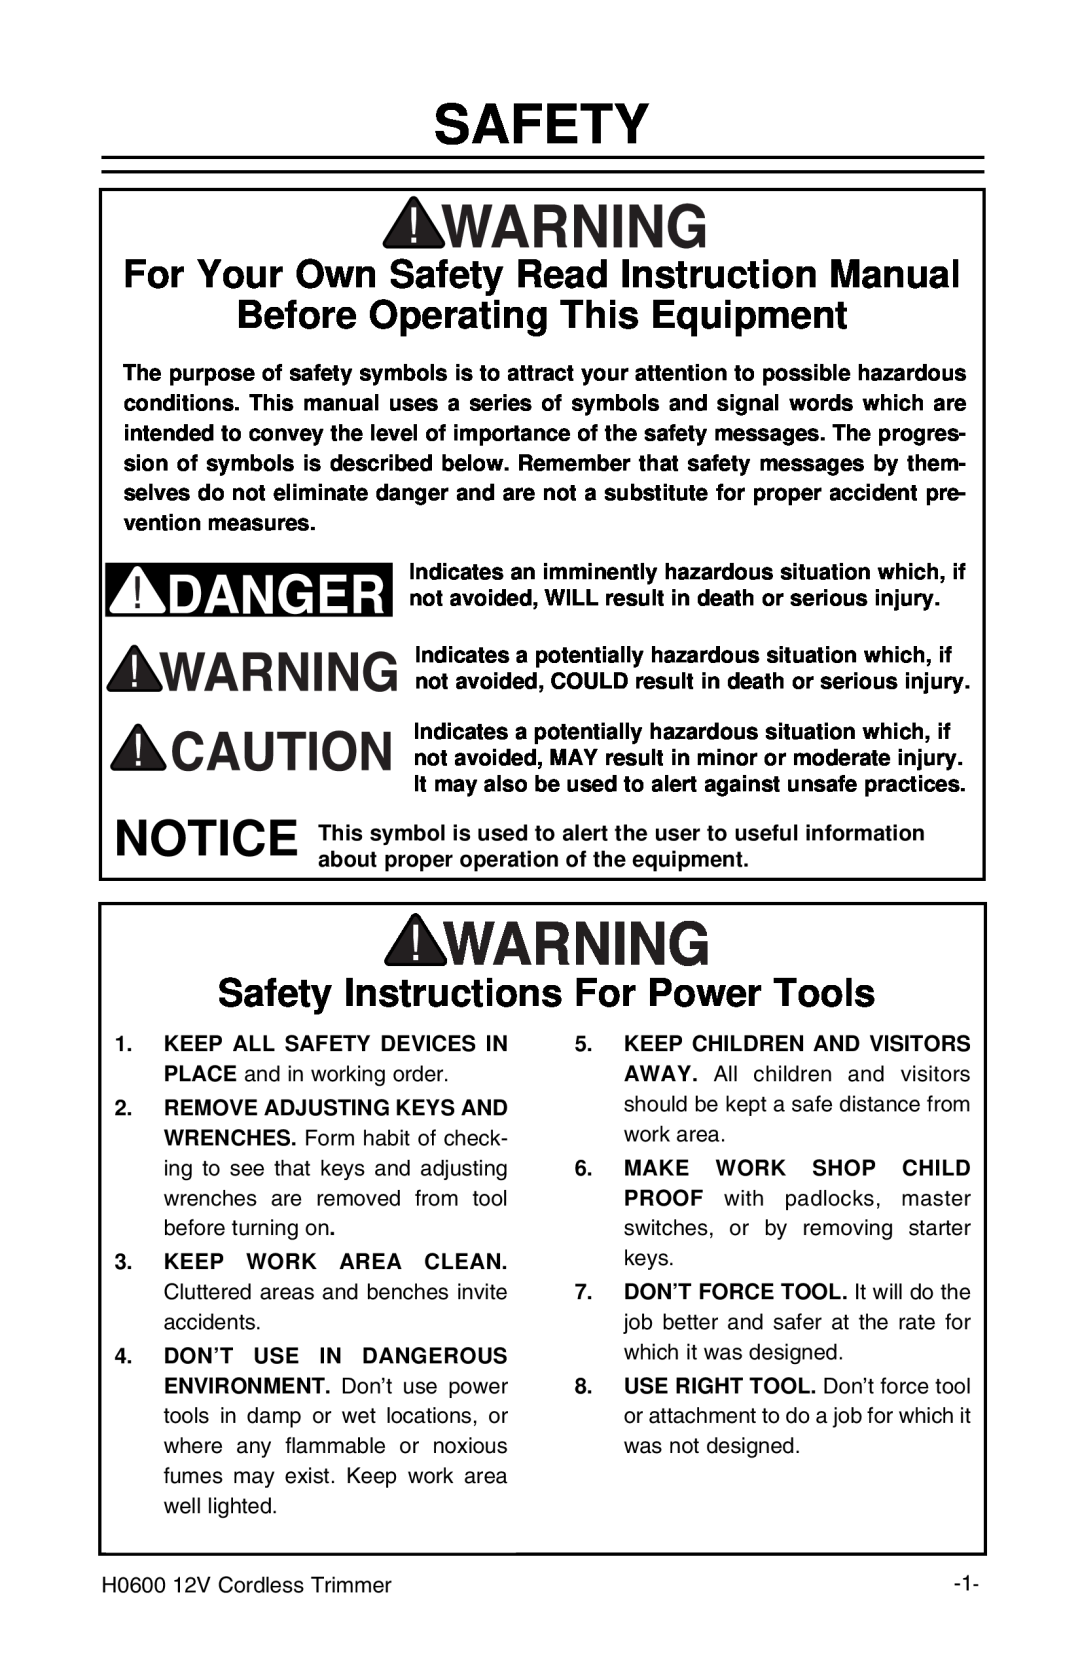 Grizzly H0600 instruction manual Before Operating This Equipment, Safety Instructions For Power Tools 